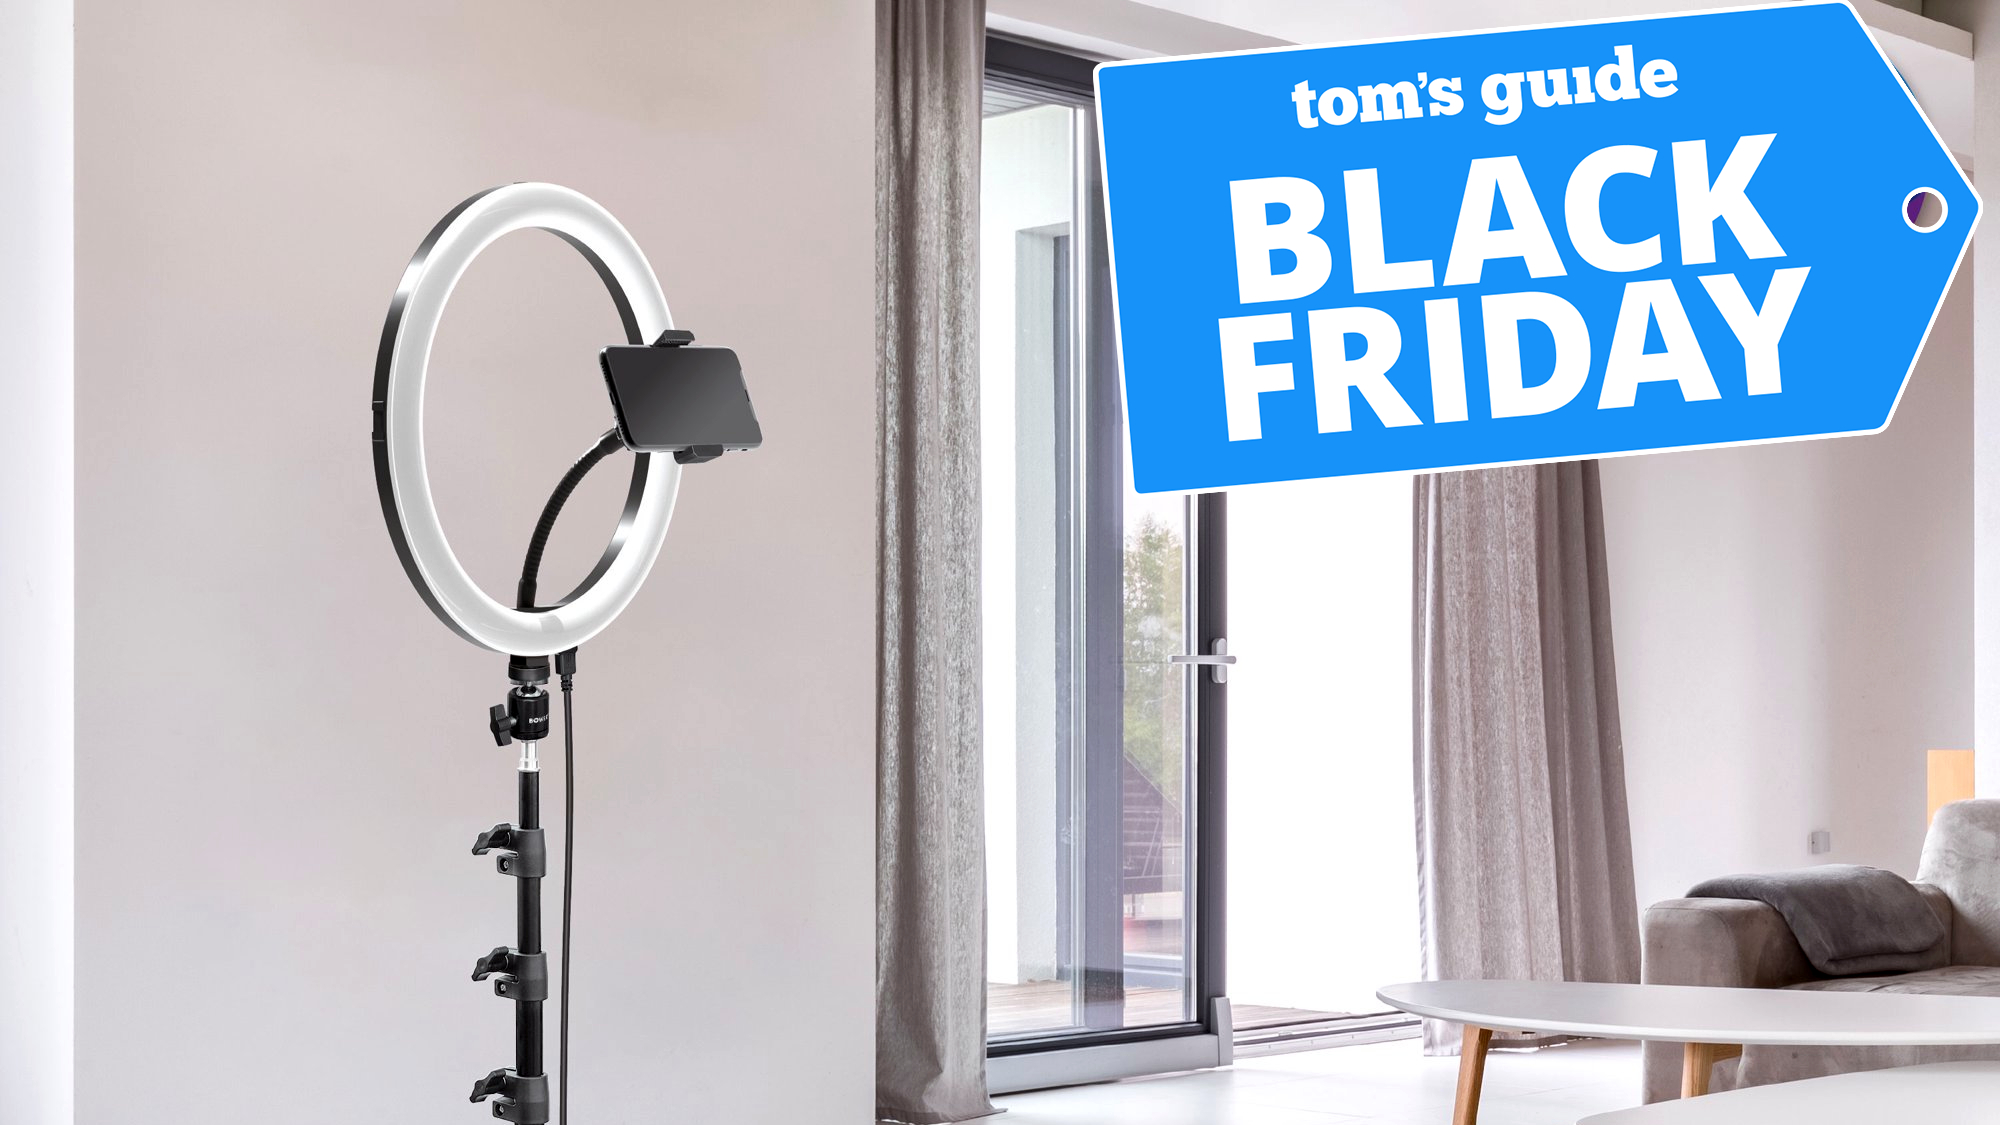 Bower 12-inch ring light promo image with black friday tag superimposed